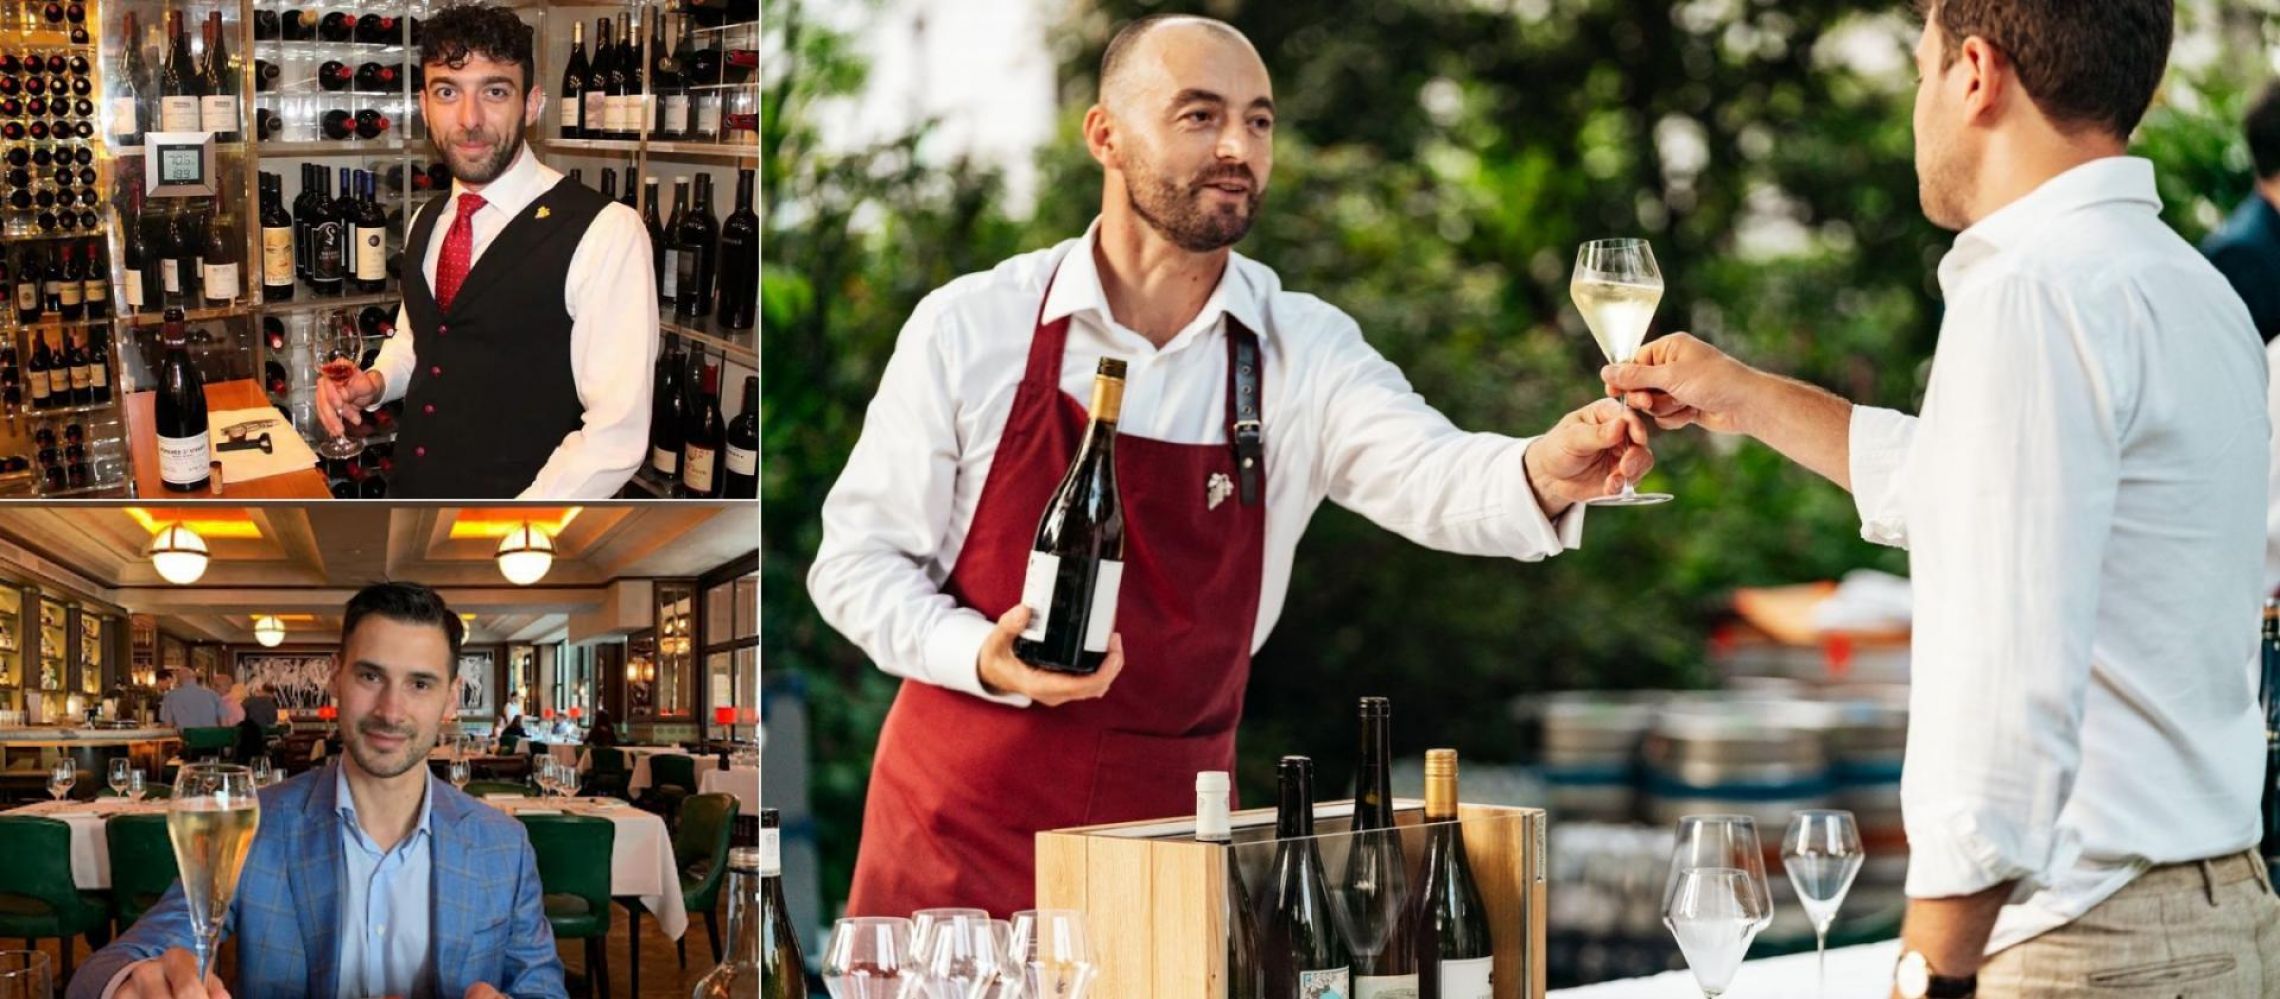 Photo for: Tips by London's 10 most renowned sommeliers on enhancing guests experience